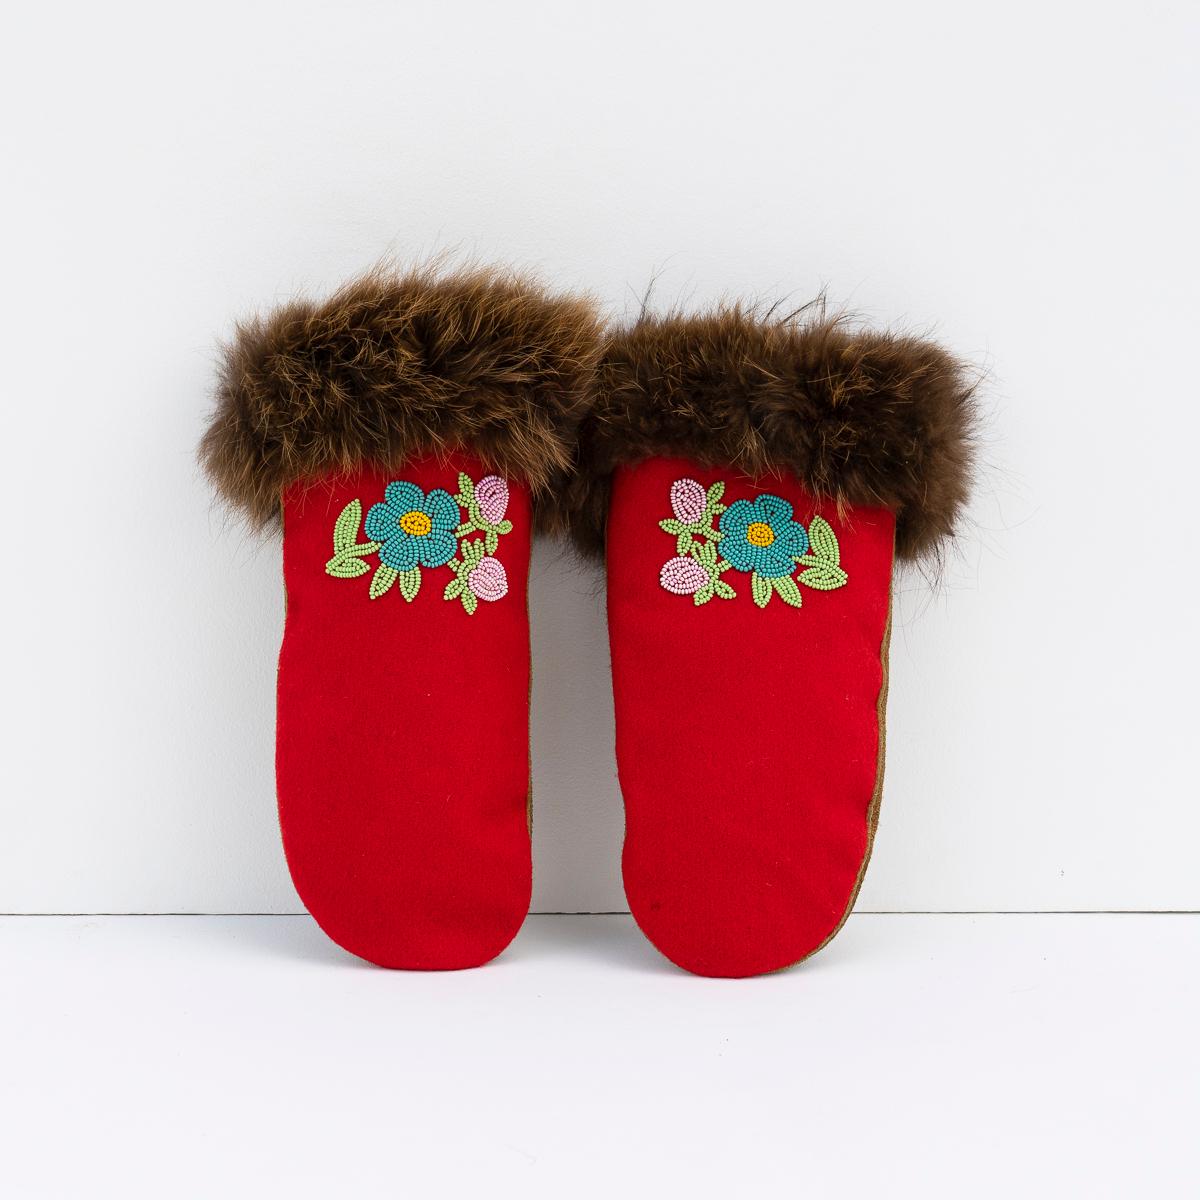 TRADITIONAL OJIBWAY TRIBAL GLOVES WITH FLORAL BEAD DETAILING
Originating from the Ojibwe (Ojibwa) people from what is currently Southern Canada and the North Mid-Western United States.

Handmade from smoked moose leather and red felt and fur